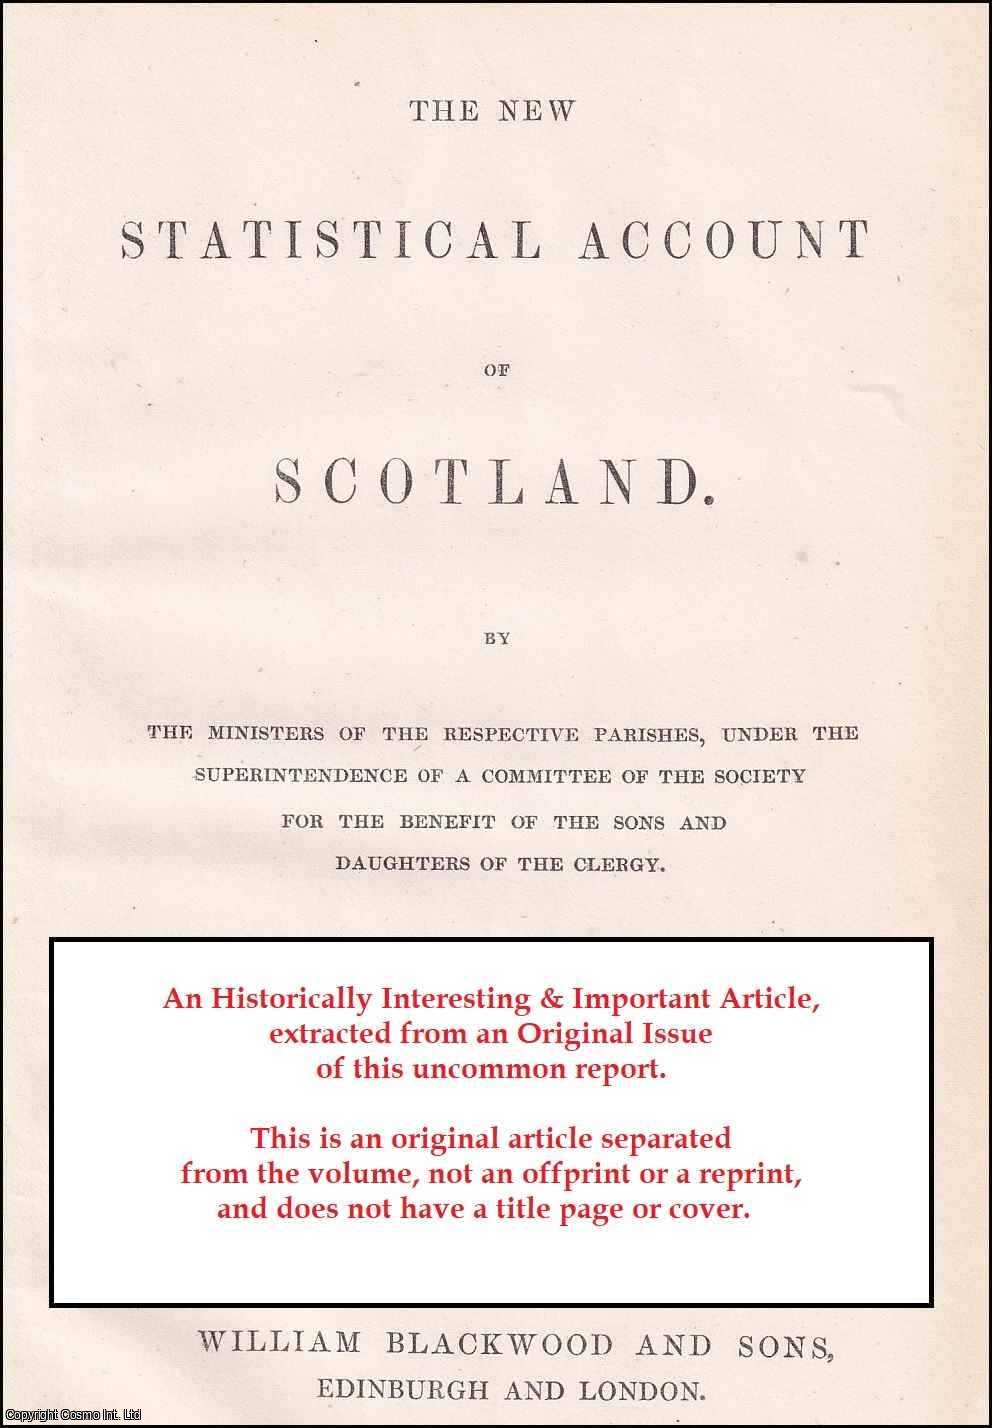 Rev. Hugh Burgess - United Parishes of Glenmuick, Tullich & Glengairn. Presbytery of Kincardine O'Neil, Synod of Aberdeen. An uncommon original article from The New Statistical Account of Scotland, 1845.